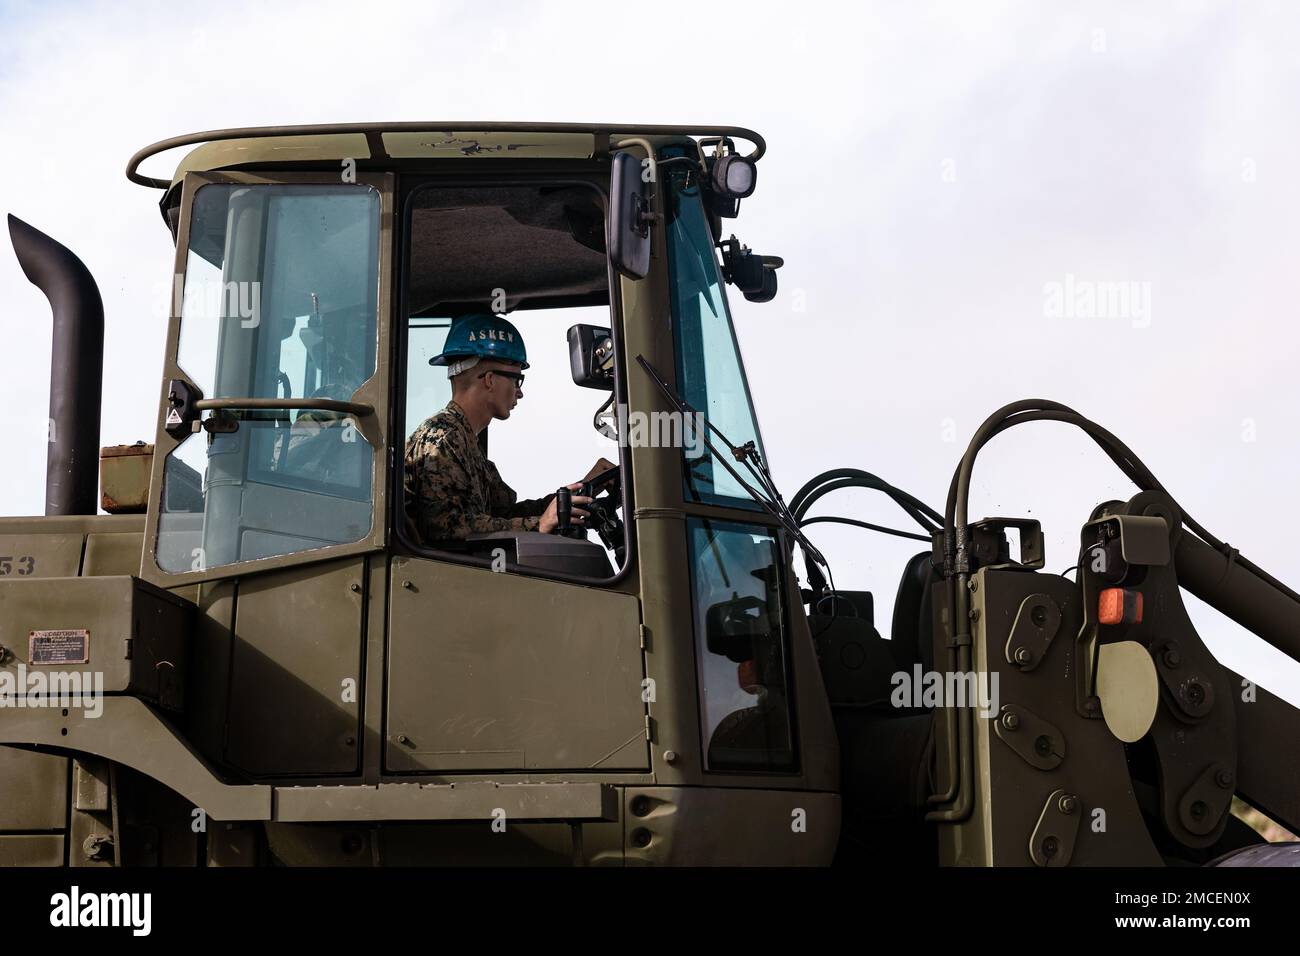 U.S. Marine Corps Lance Cpl. Jacob Griffeth, an engineer equipment operator with Combat Logistics Battalion 31, 31st Marine Expeditionary Unit, operates a MMV All-Terrain Forklift during a foreign humanitarian assistance exercise at Camp Hansen, Okinawa, Japan, June 30, 2022. The FHA was conducted to test the Marines’ abilities to interact and aid humanitarian needs while promoting regional stability and security. The 31st MEU, the Marine Corps’ only continuously forward-deployed MEU, provides a flexible and lethal force ready to perform a wide range of military operations as the premiere cris Stock Photo